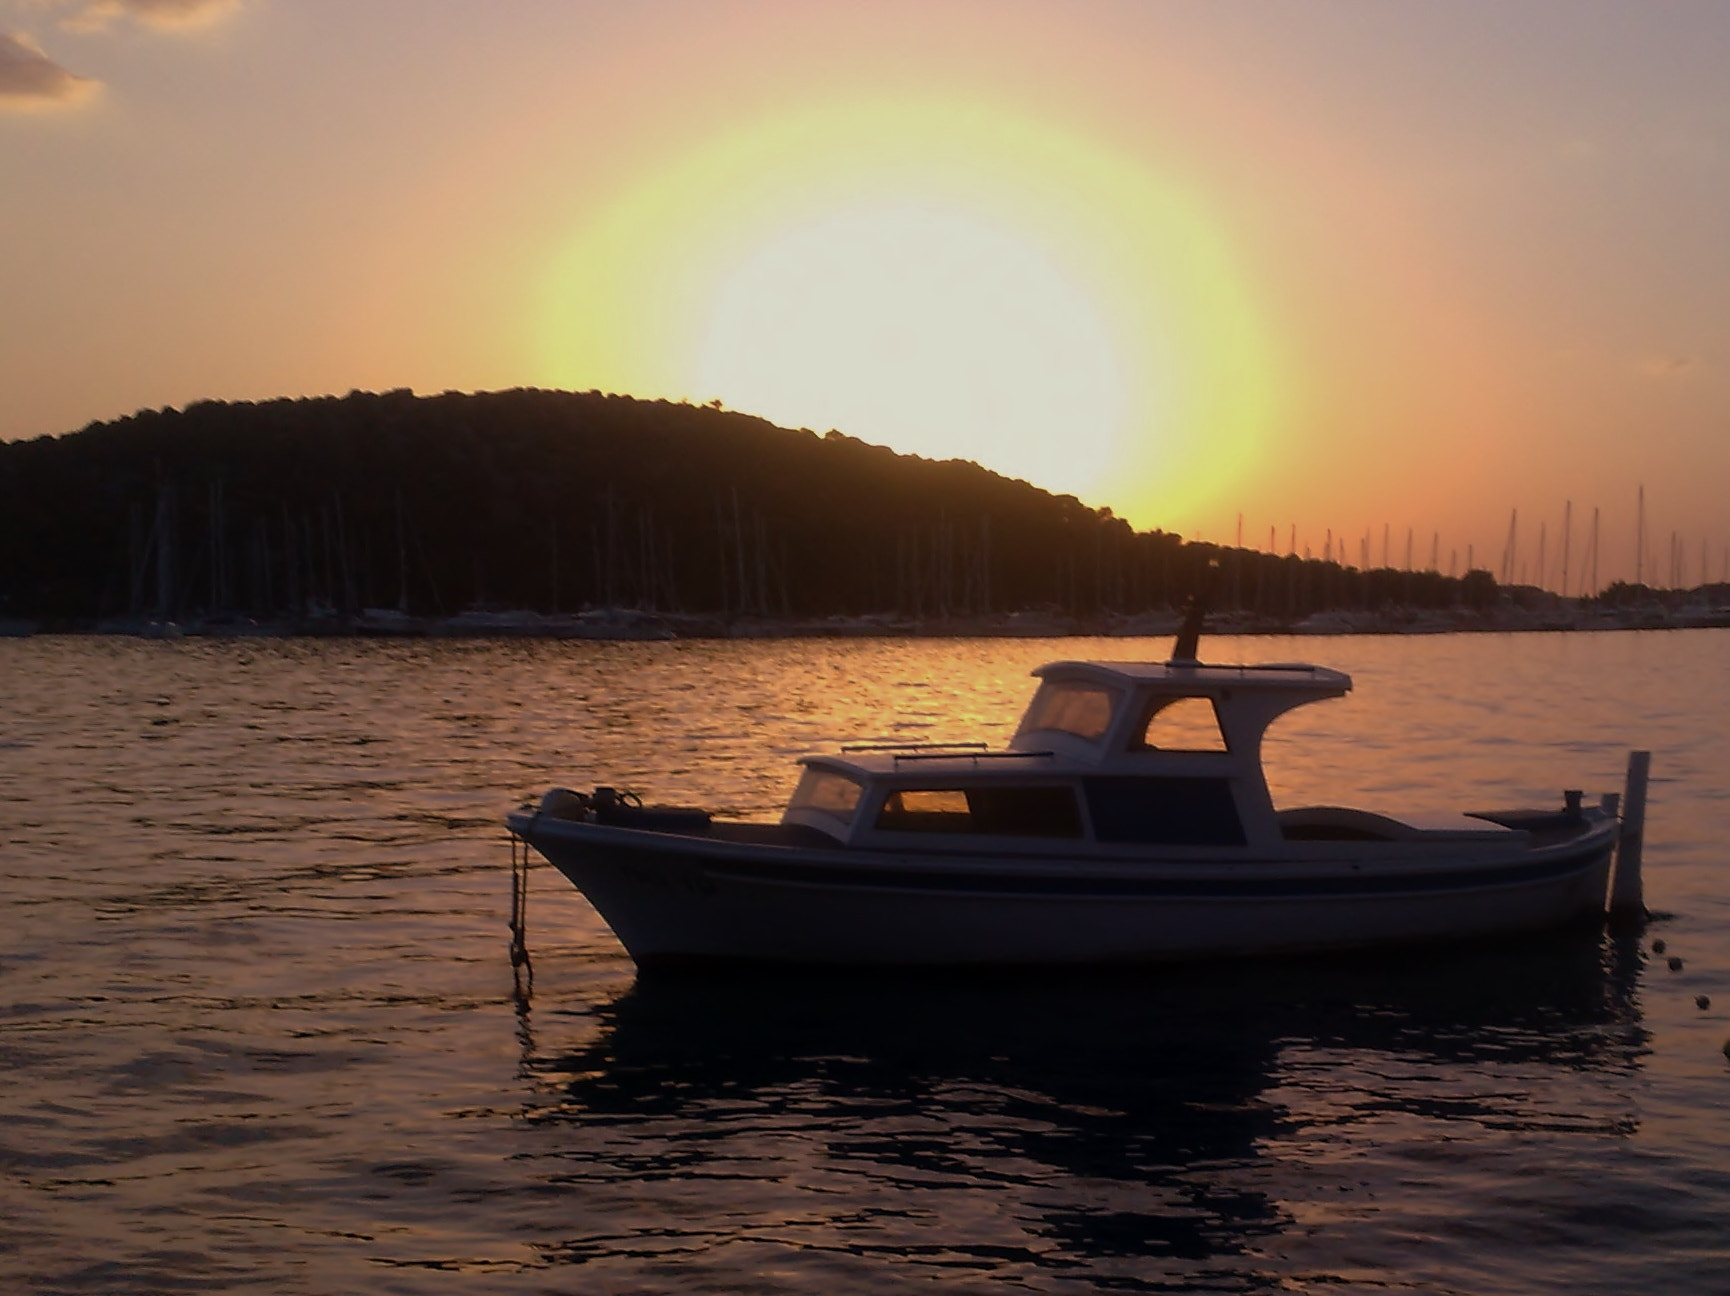 Nokia N95 sample photo. Boat in the sunset photography